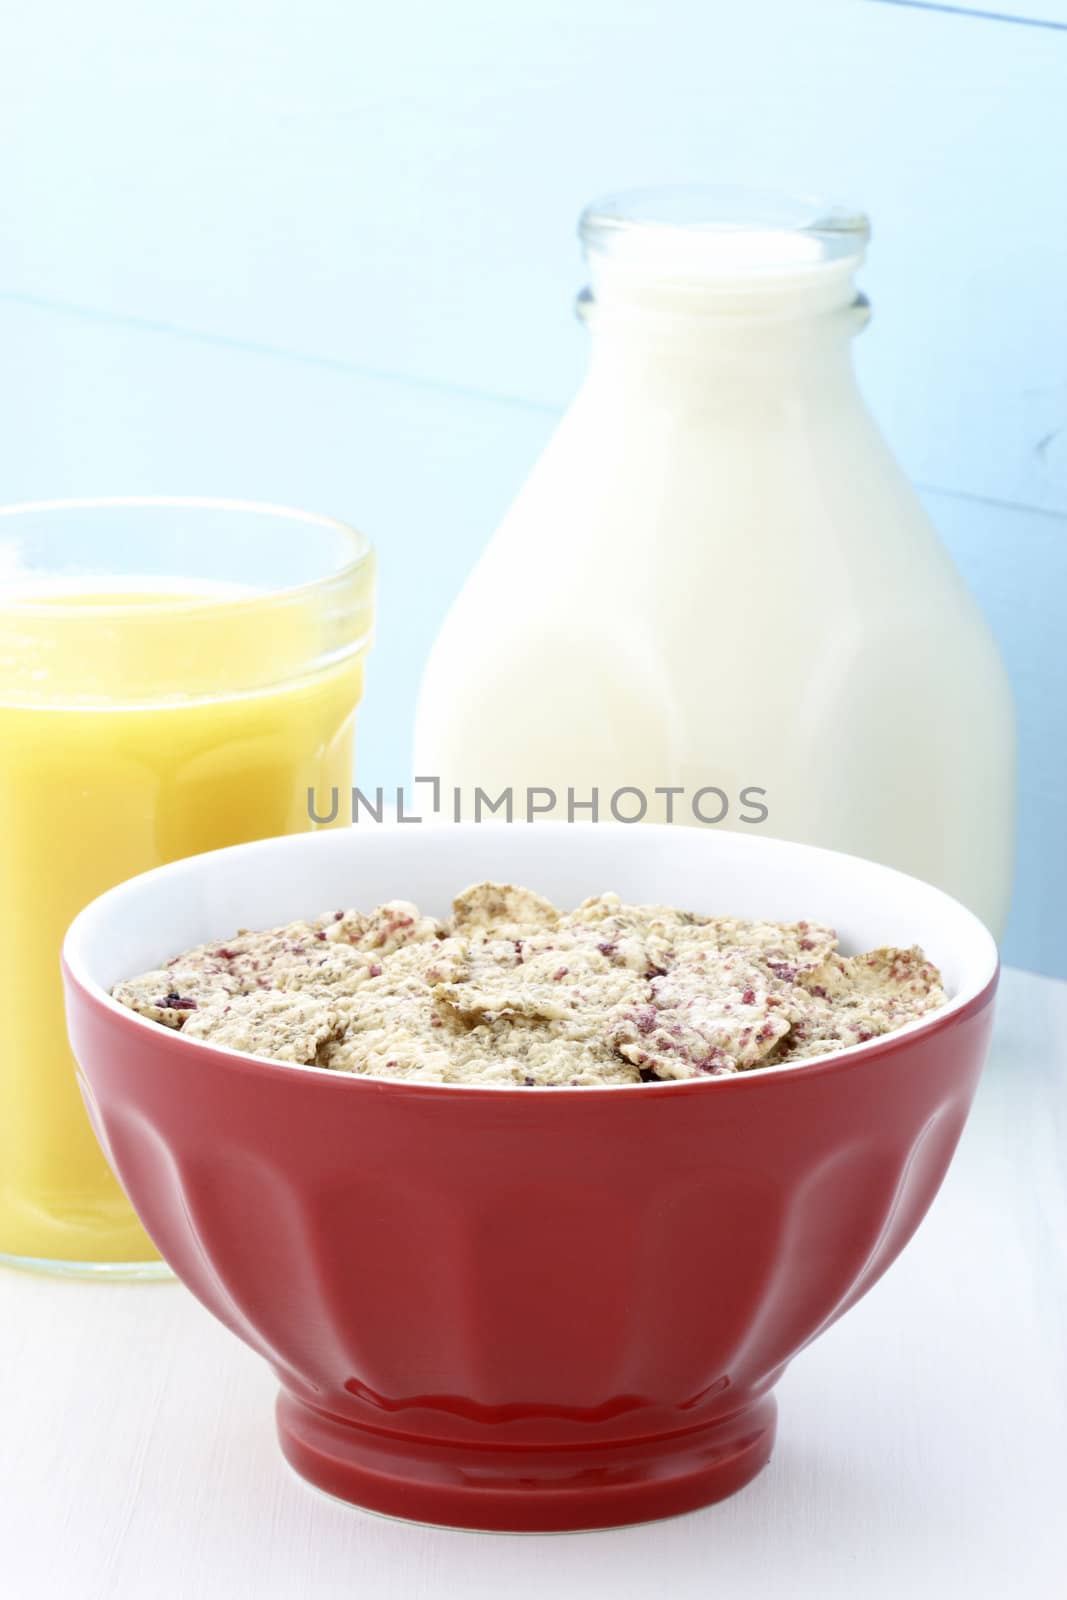 Delicious and healthy breakfast cereal with orange juice